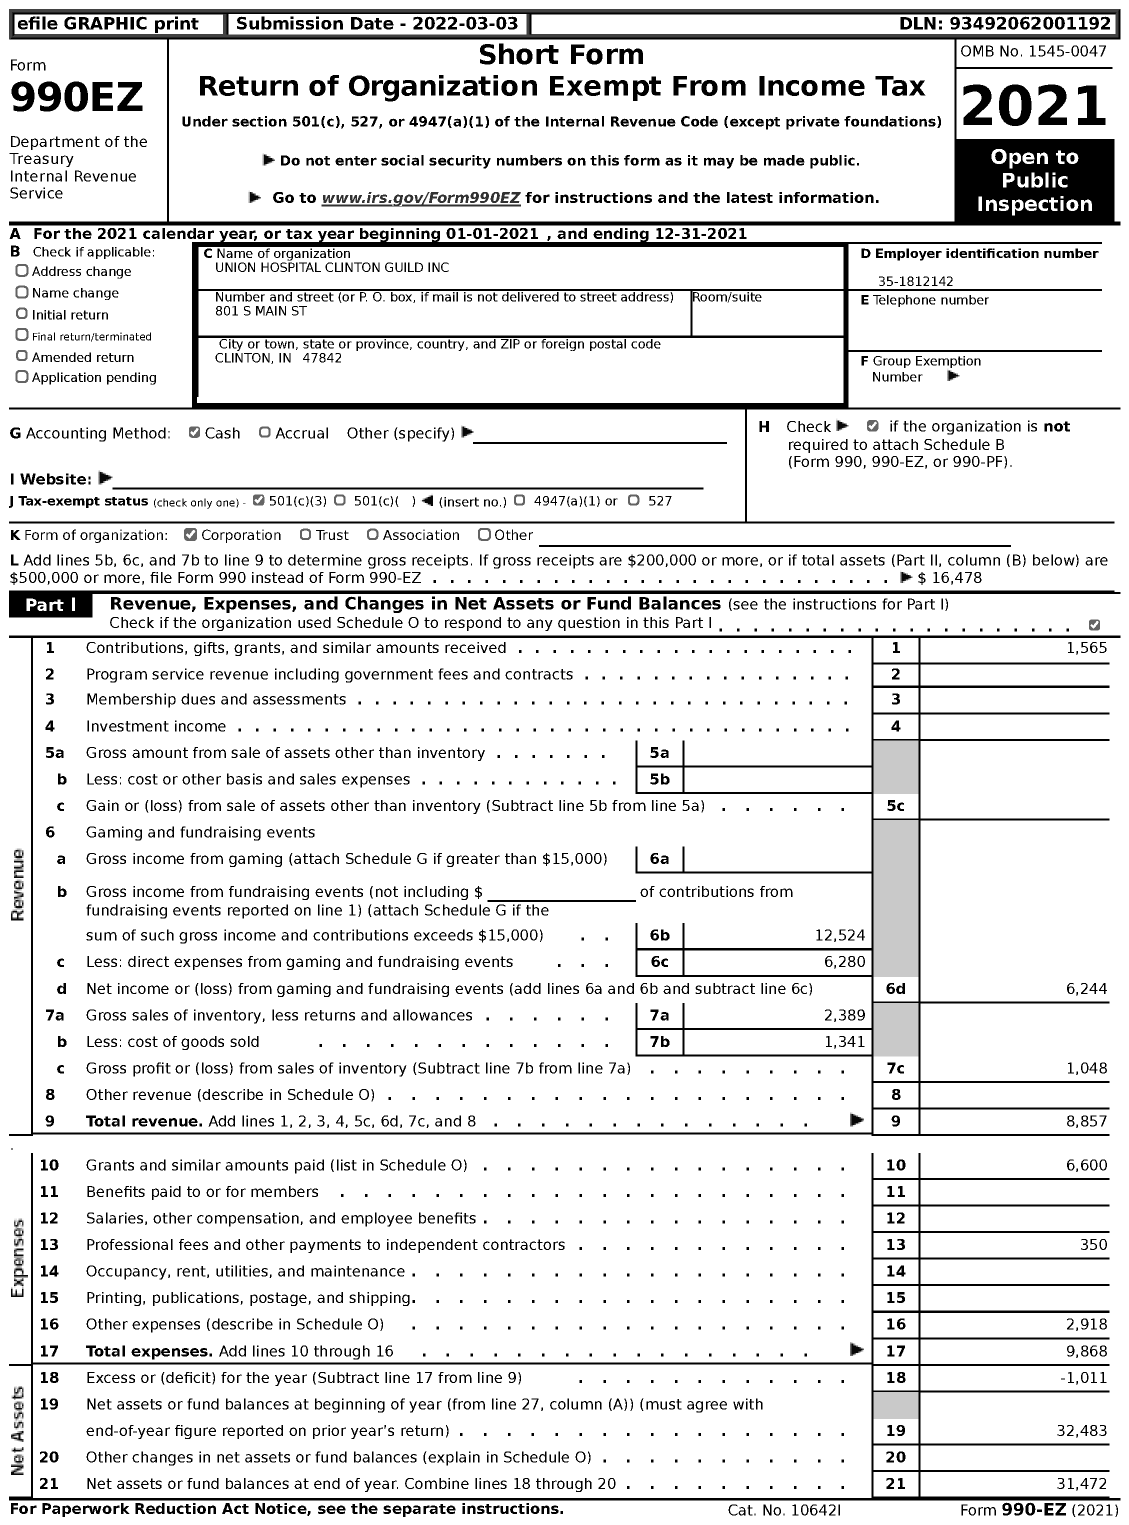 Image of first page of 2021 Form 990EZ for Union Hospital Clinton Guild